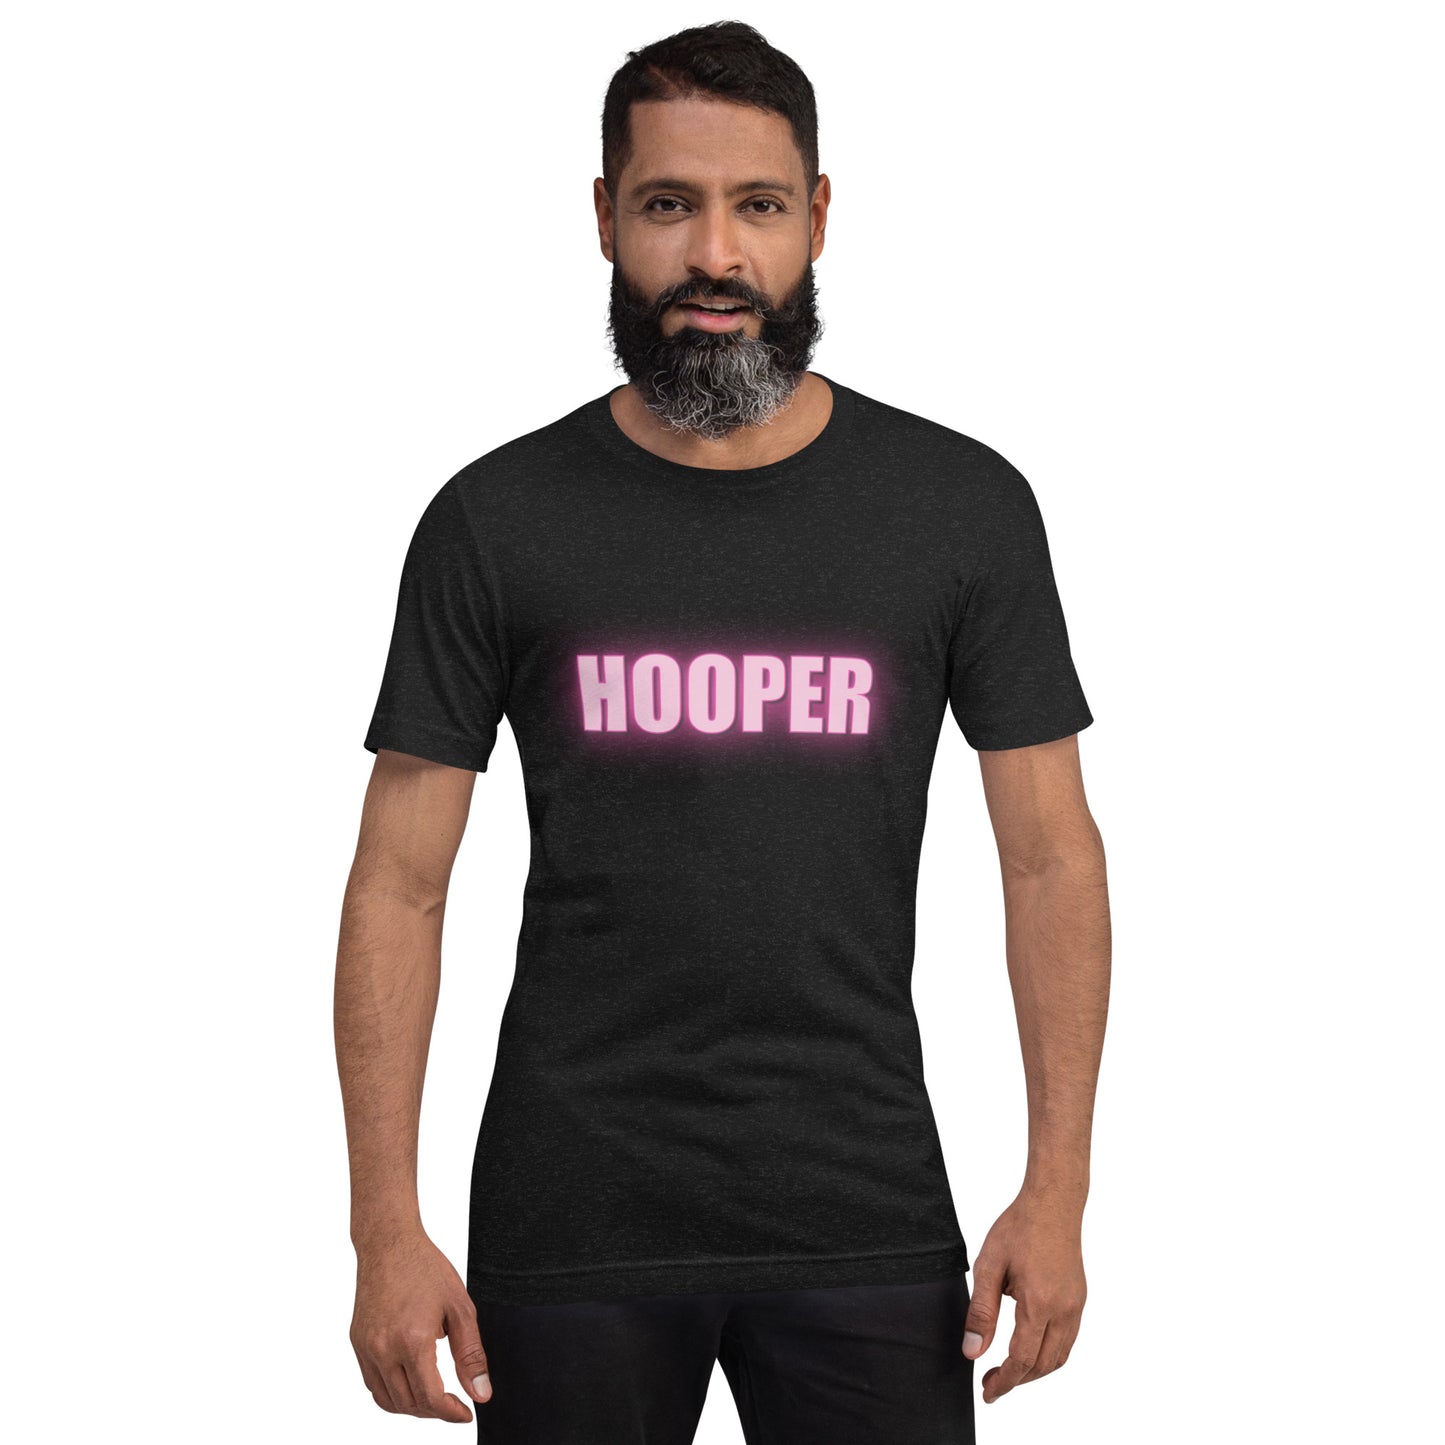 Hooper Pink Men's T-Shirt - Soft and Durable for Men